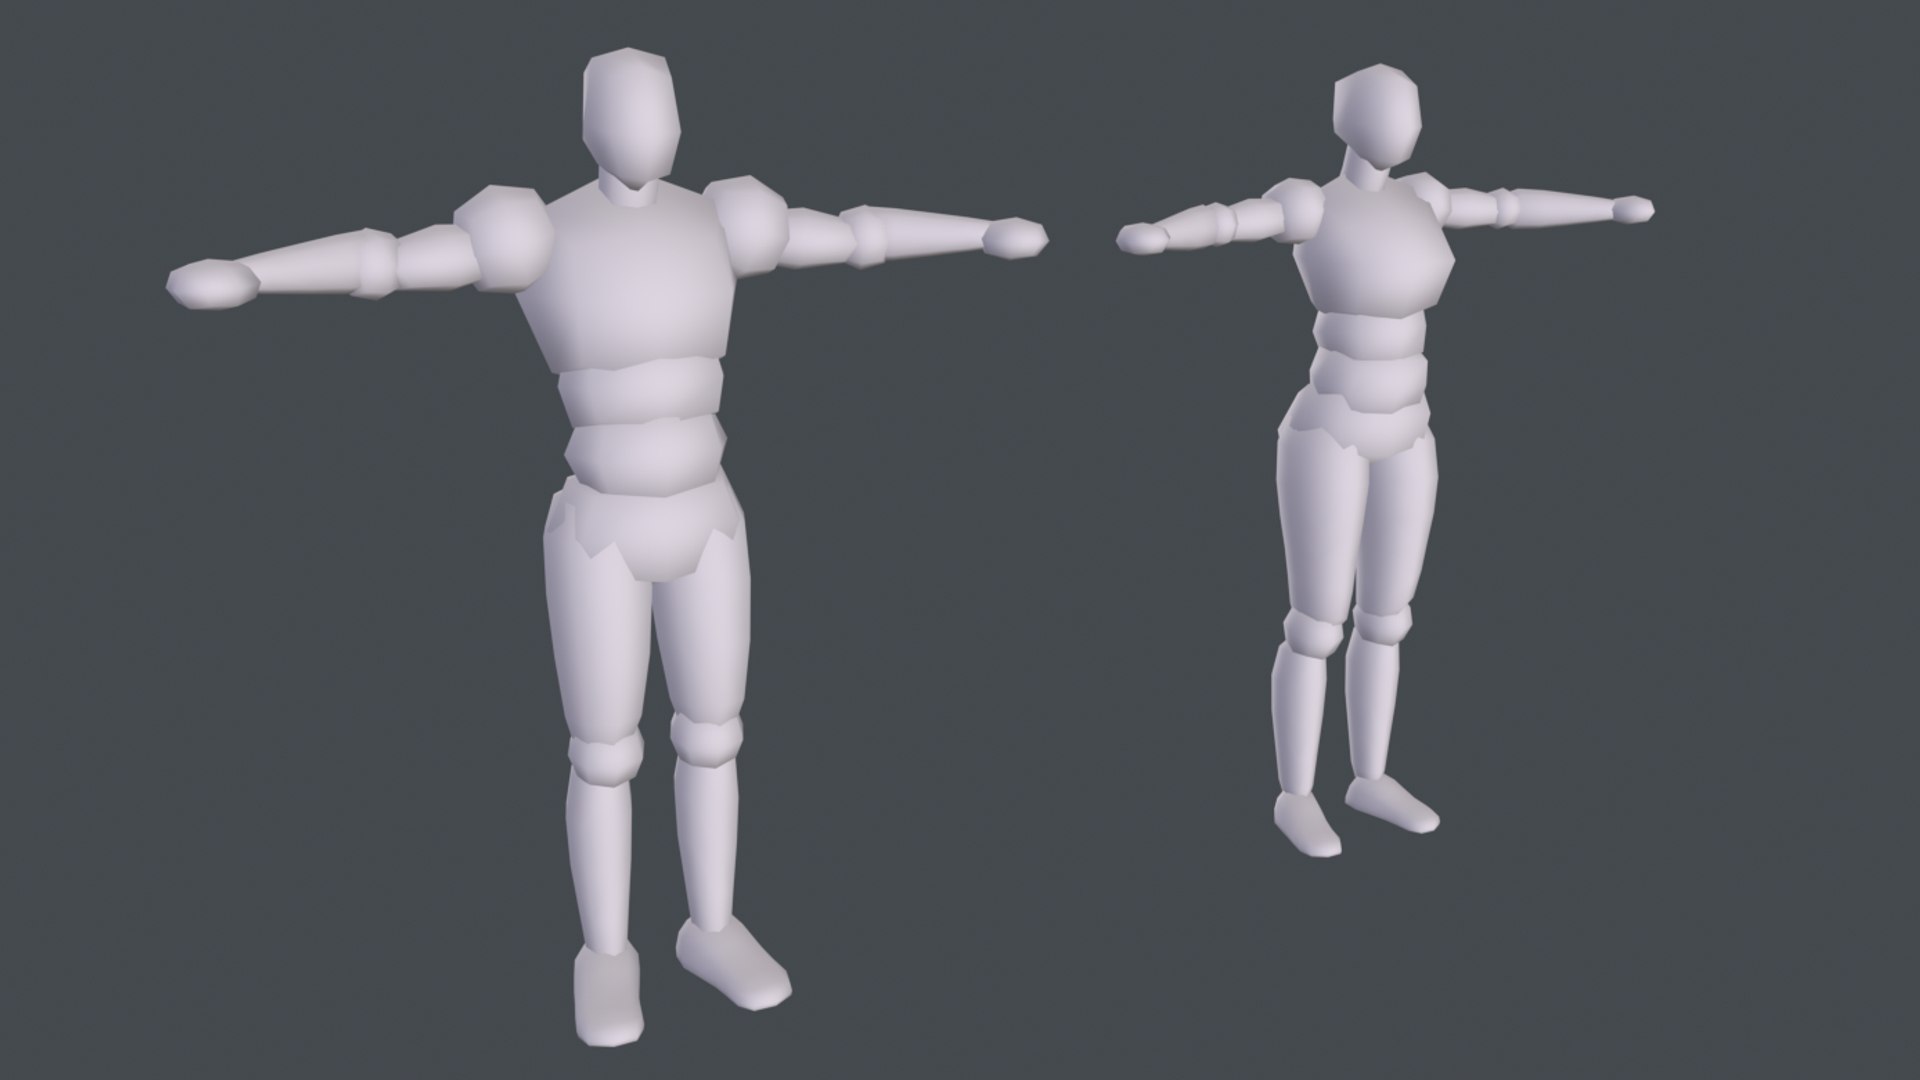 Rigged Dummy Characters for Game Prototyping 3D model - TurboSquid 2046993